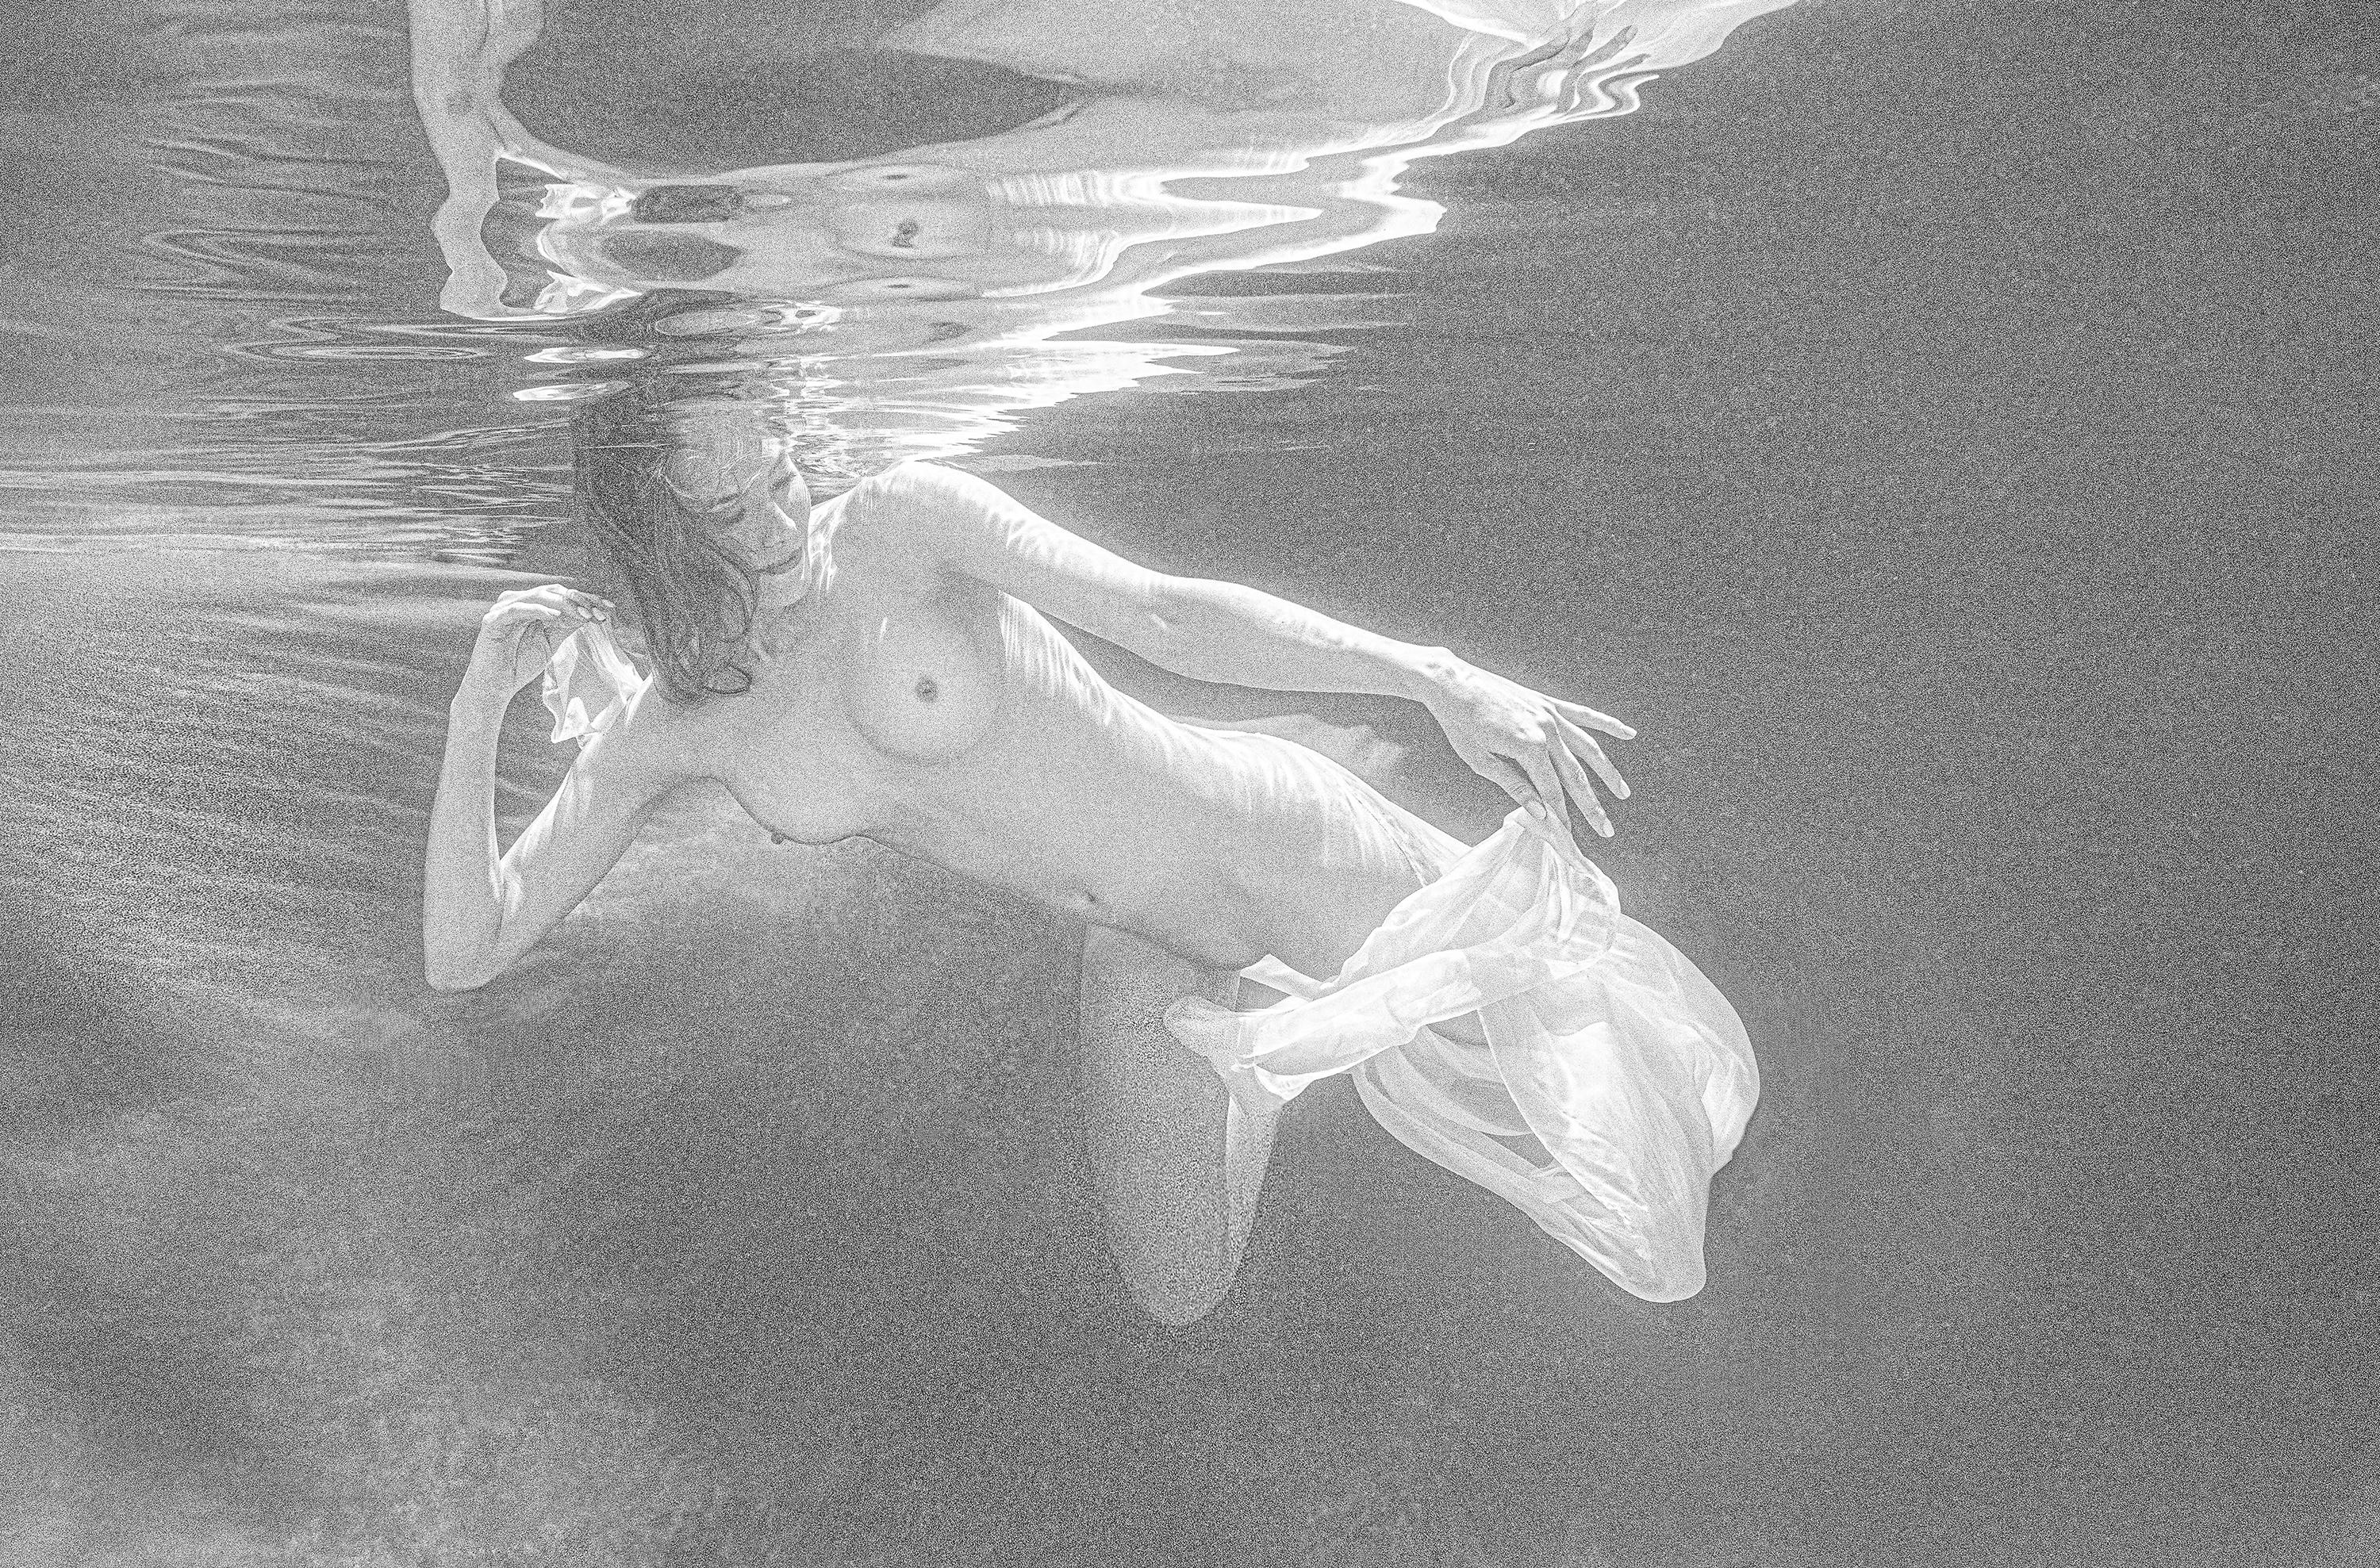 Alex Sher Nude Photograph - Water Sketch - underwater black & white nude photograph - archival pigment 18x24